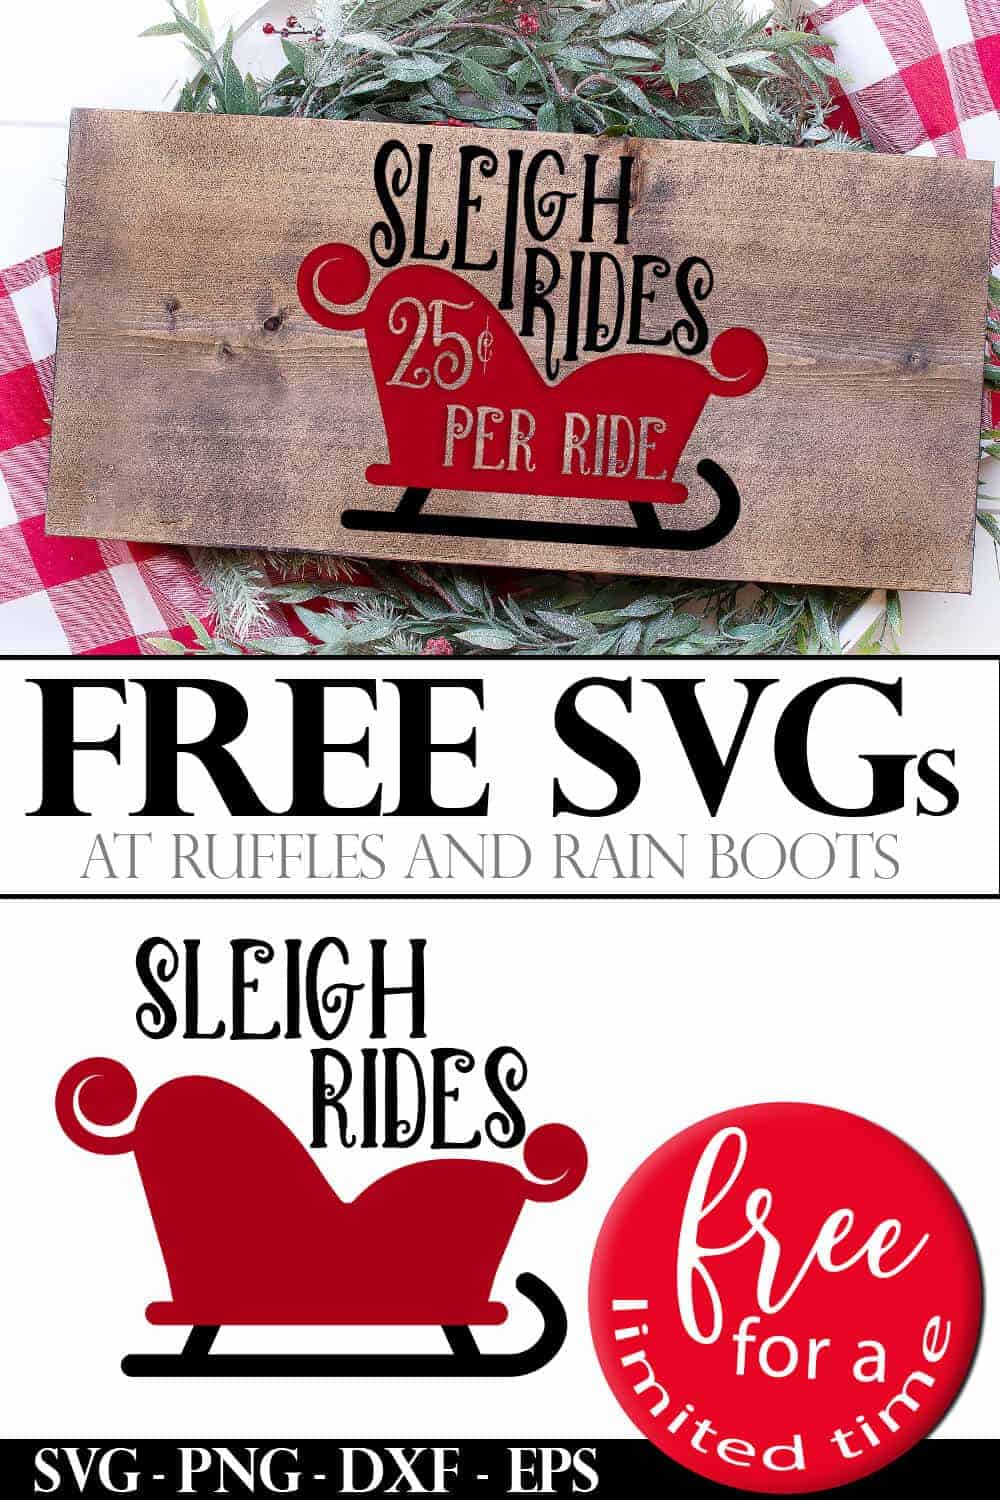 red sleigh ride svg in vinyl on wood plank free for a limited time collage